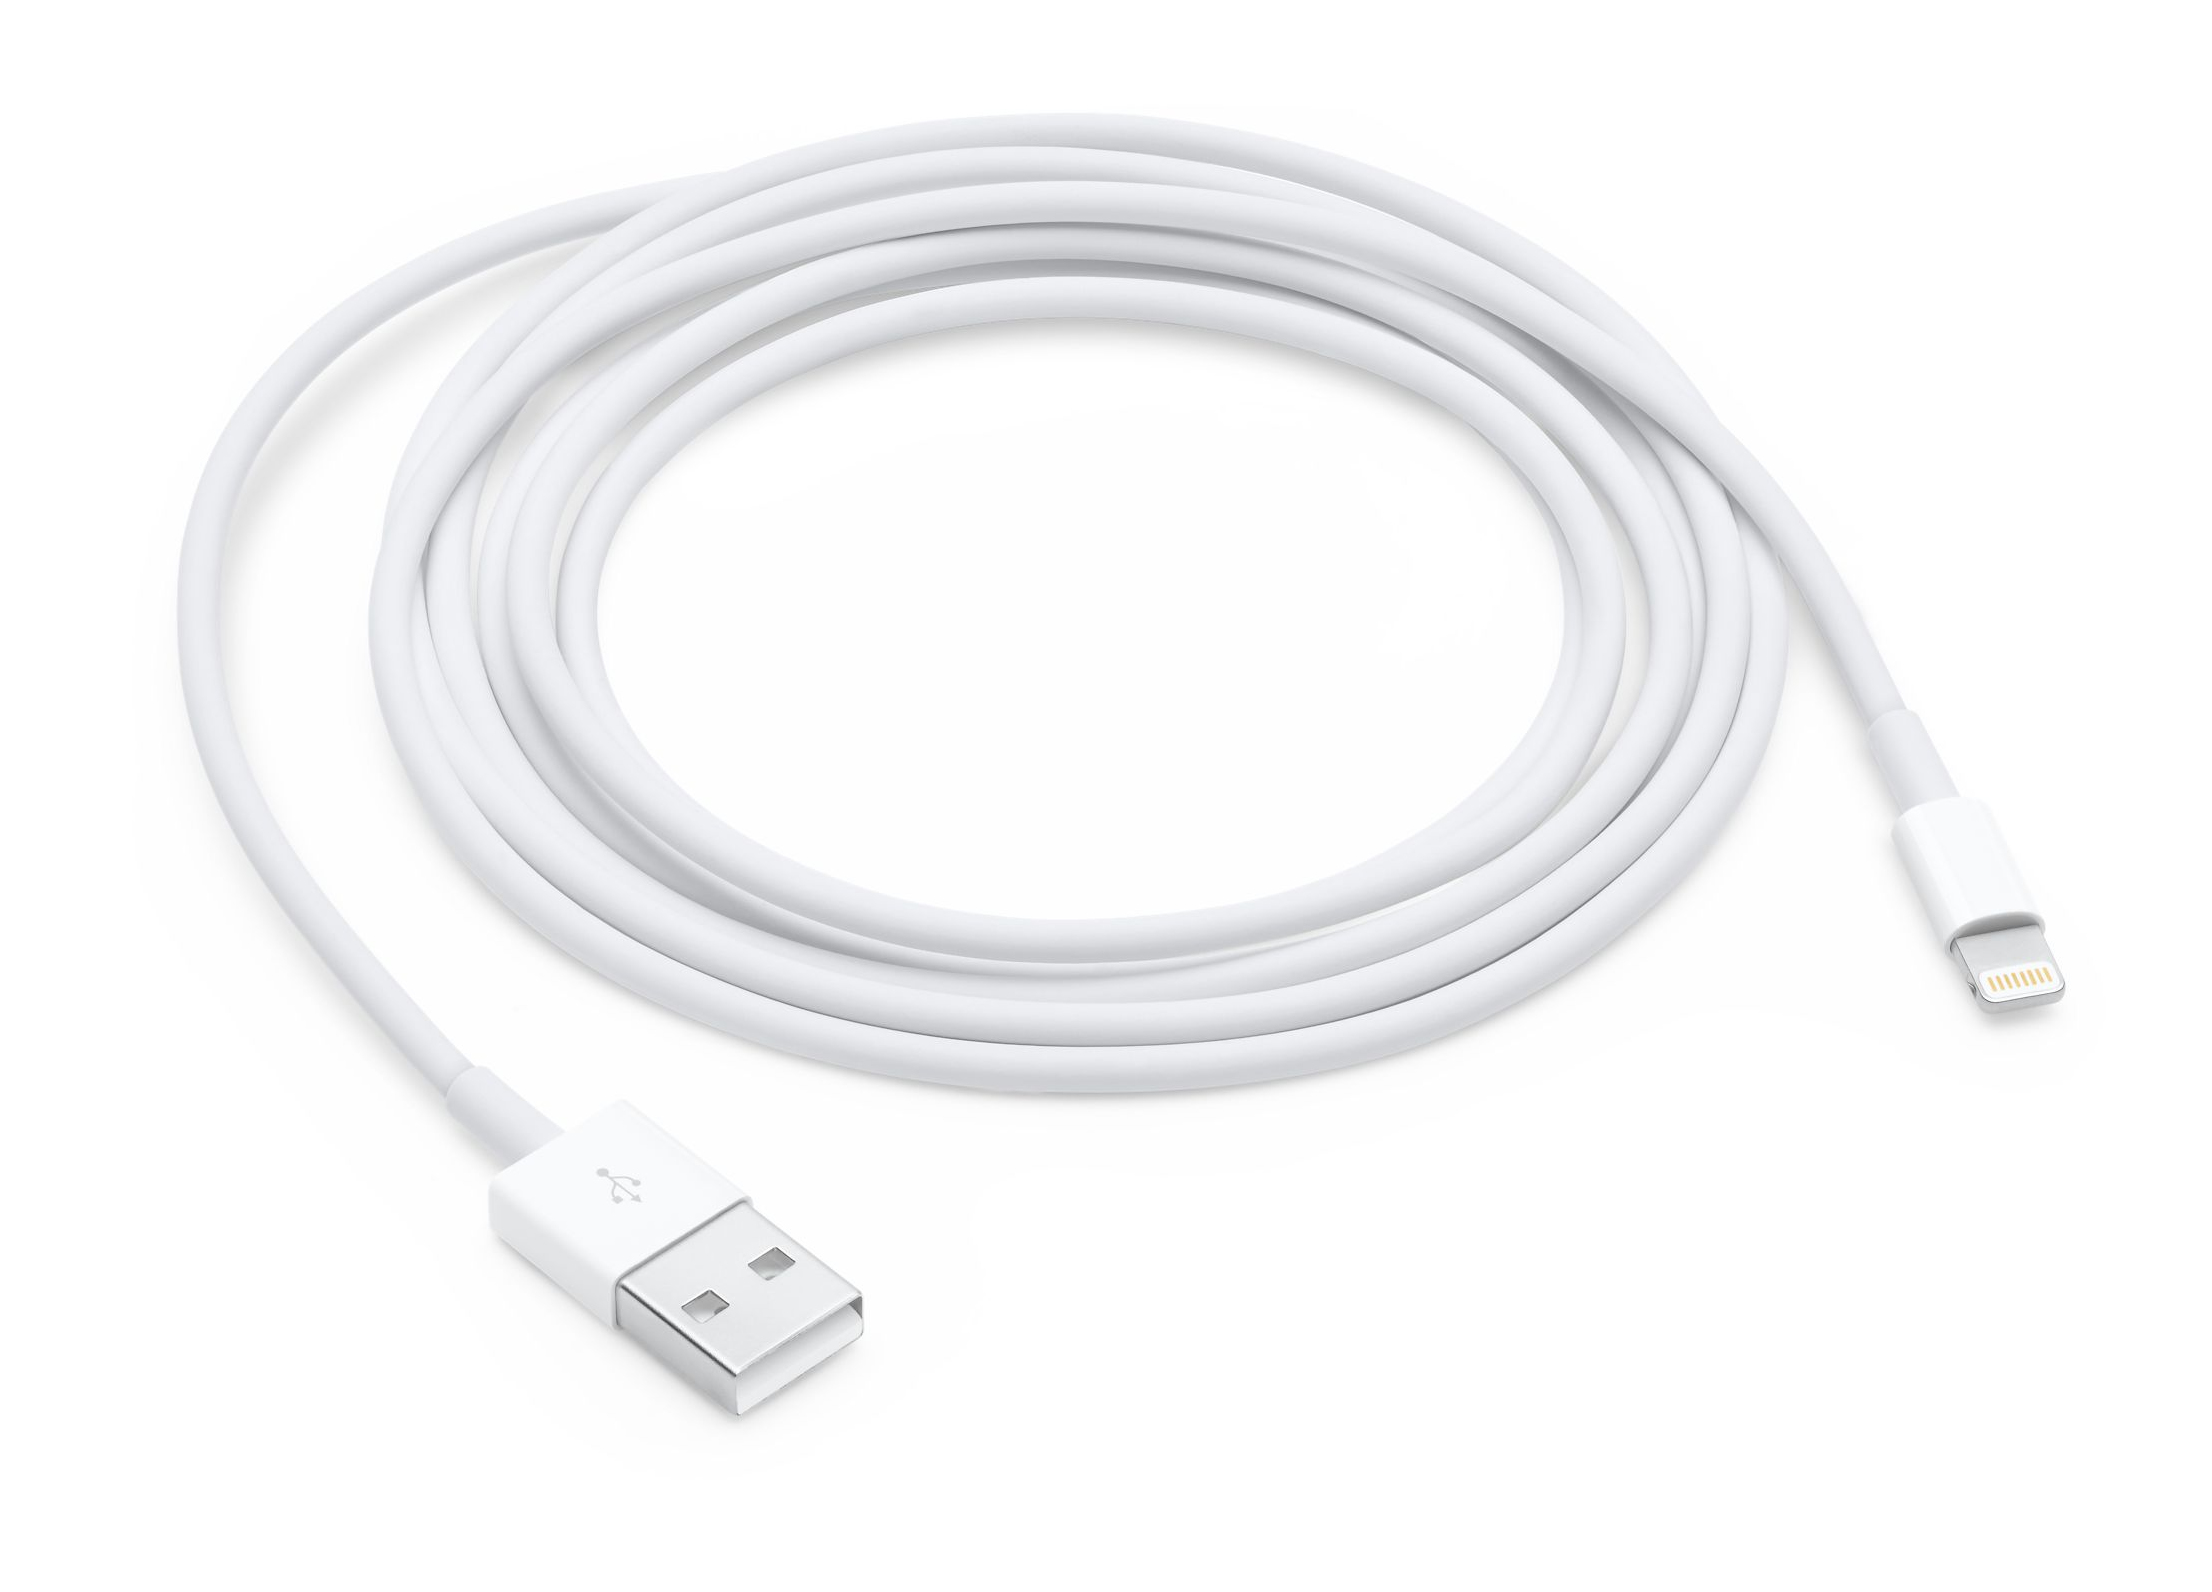 Apple Apple - Lightning Cable - Lightning Male To Usb Male - 2 M - For Ipad/iphone/ipod (lightning) Md819zm/a - xep01